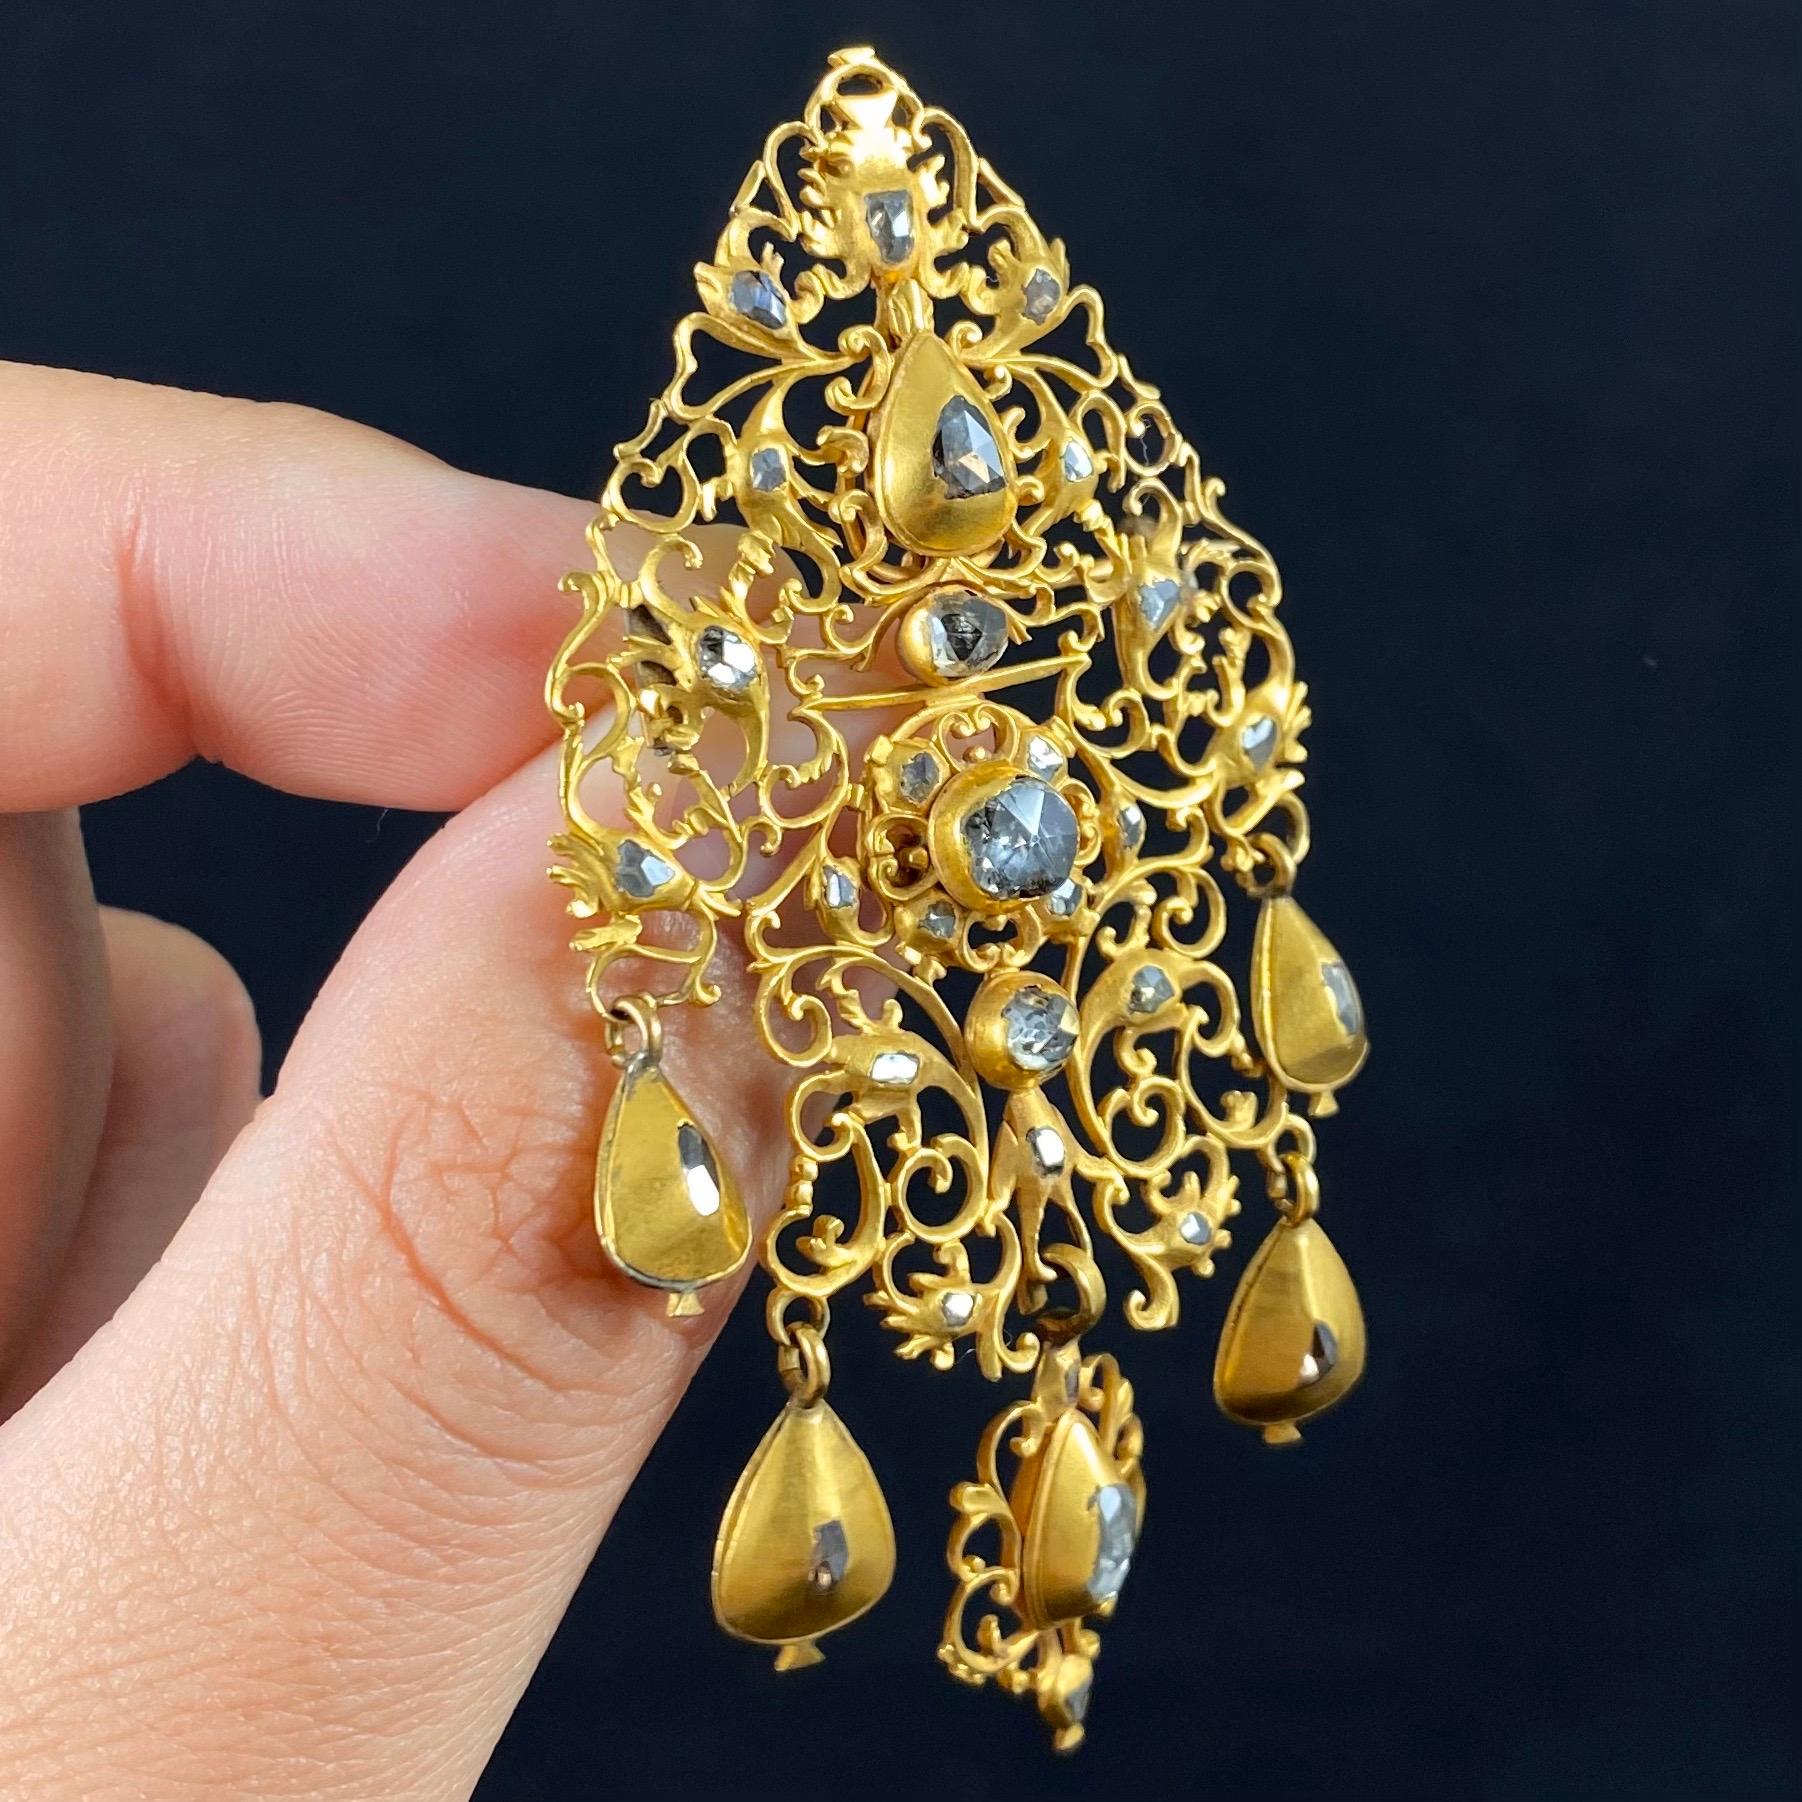 18th century jewelry for sale